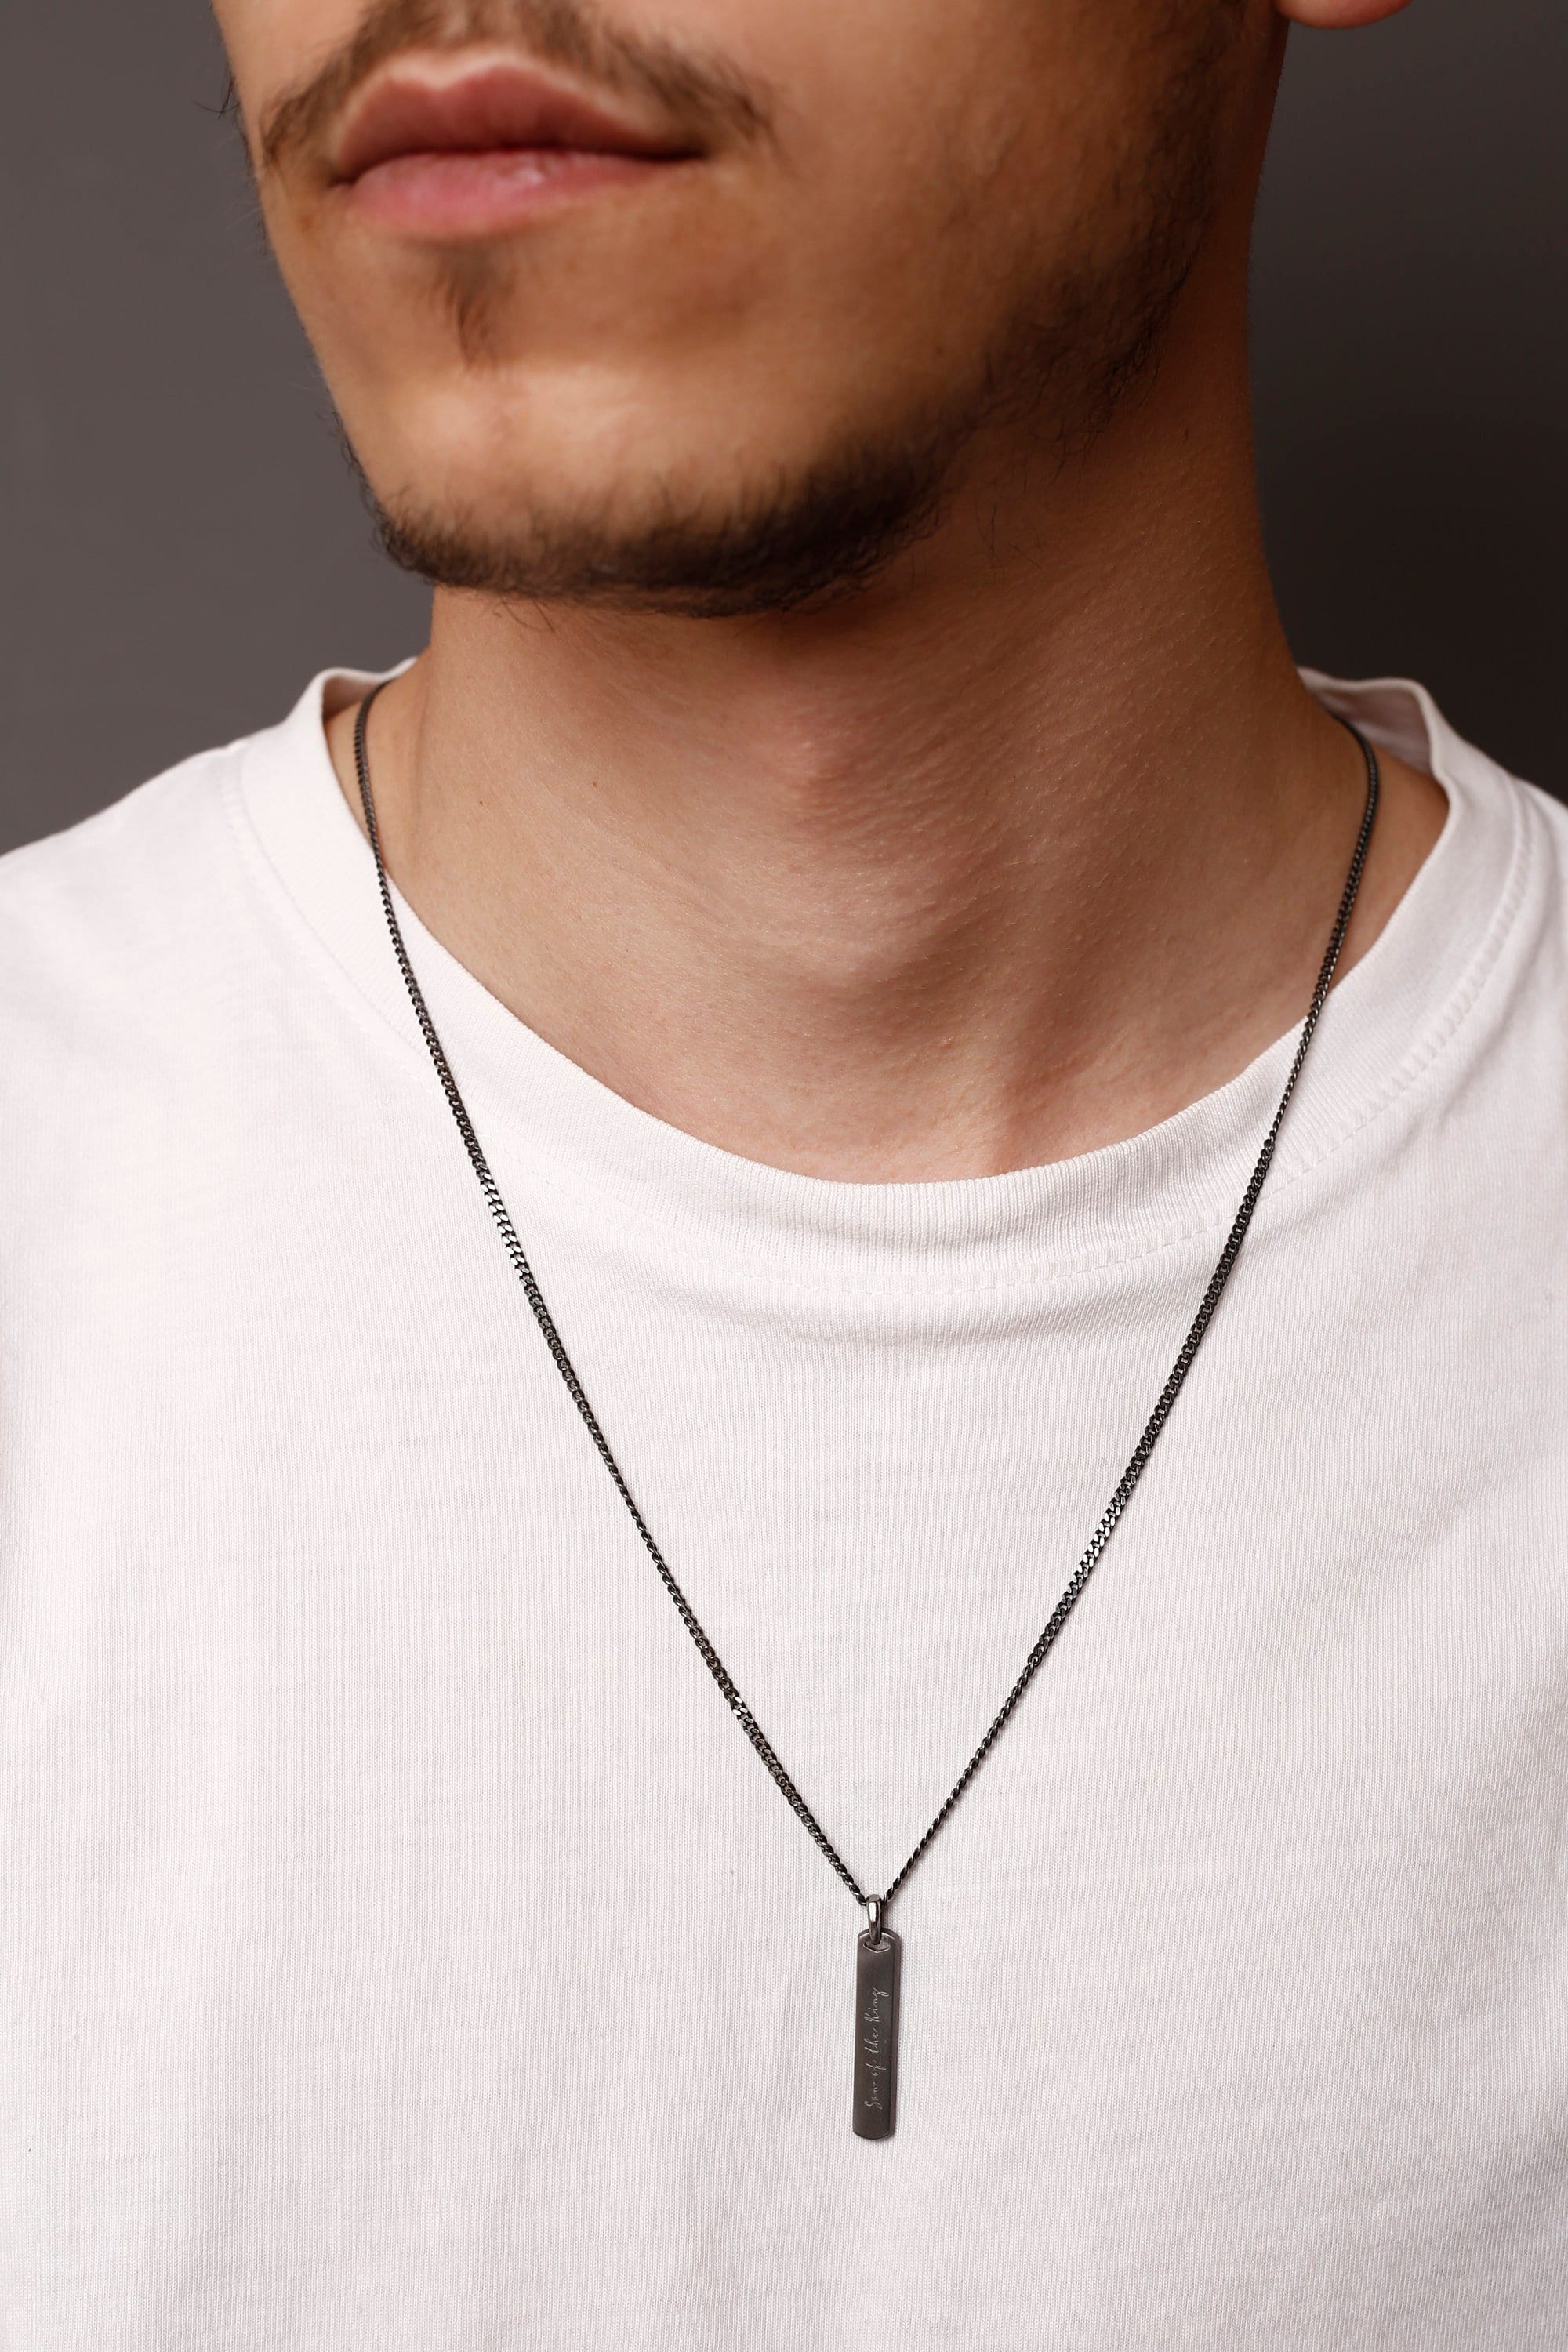 Men Stainless Steel Hollow Geometric Bar Pendant Necklaces with Box  Chain,Casual Gents Neck Collar Jewelry Gift